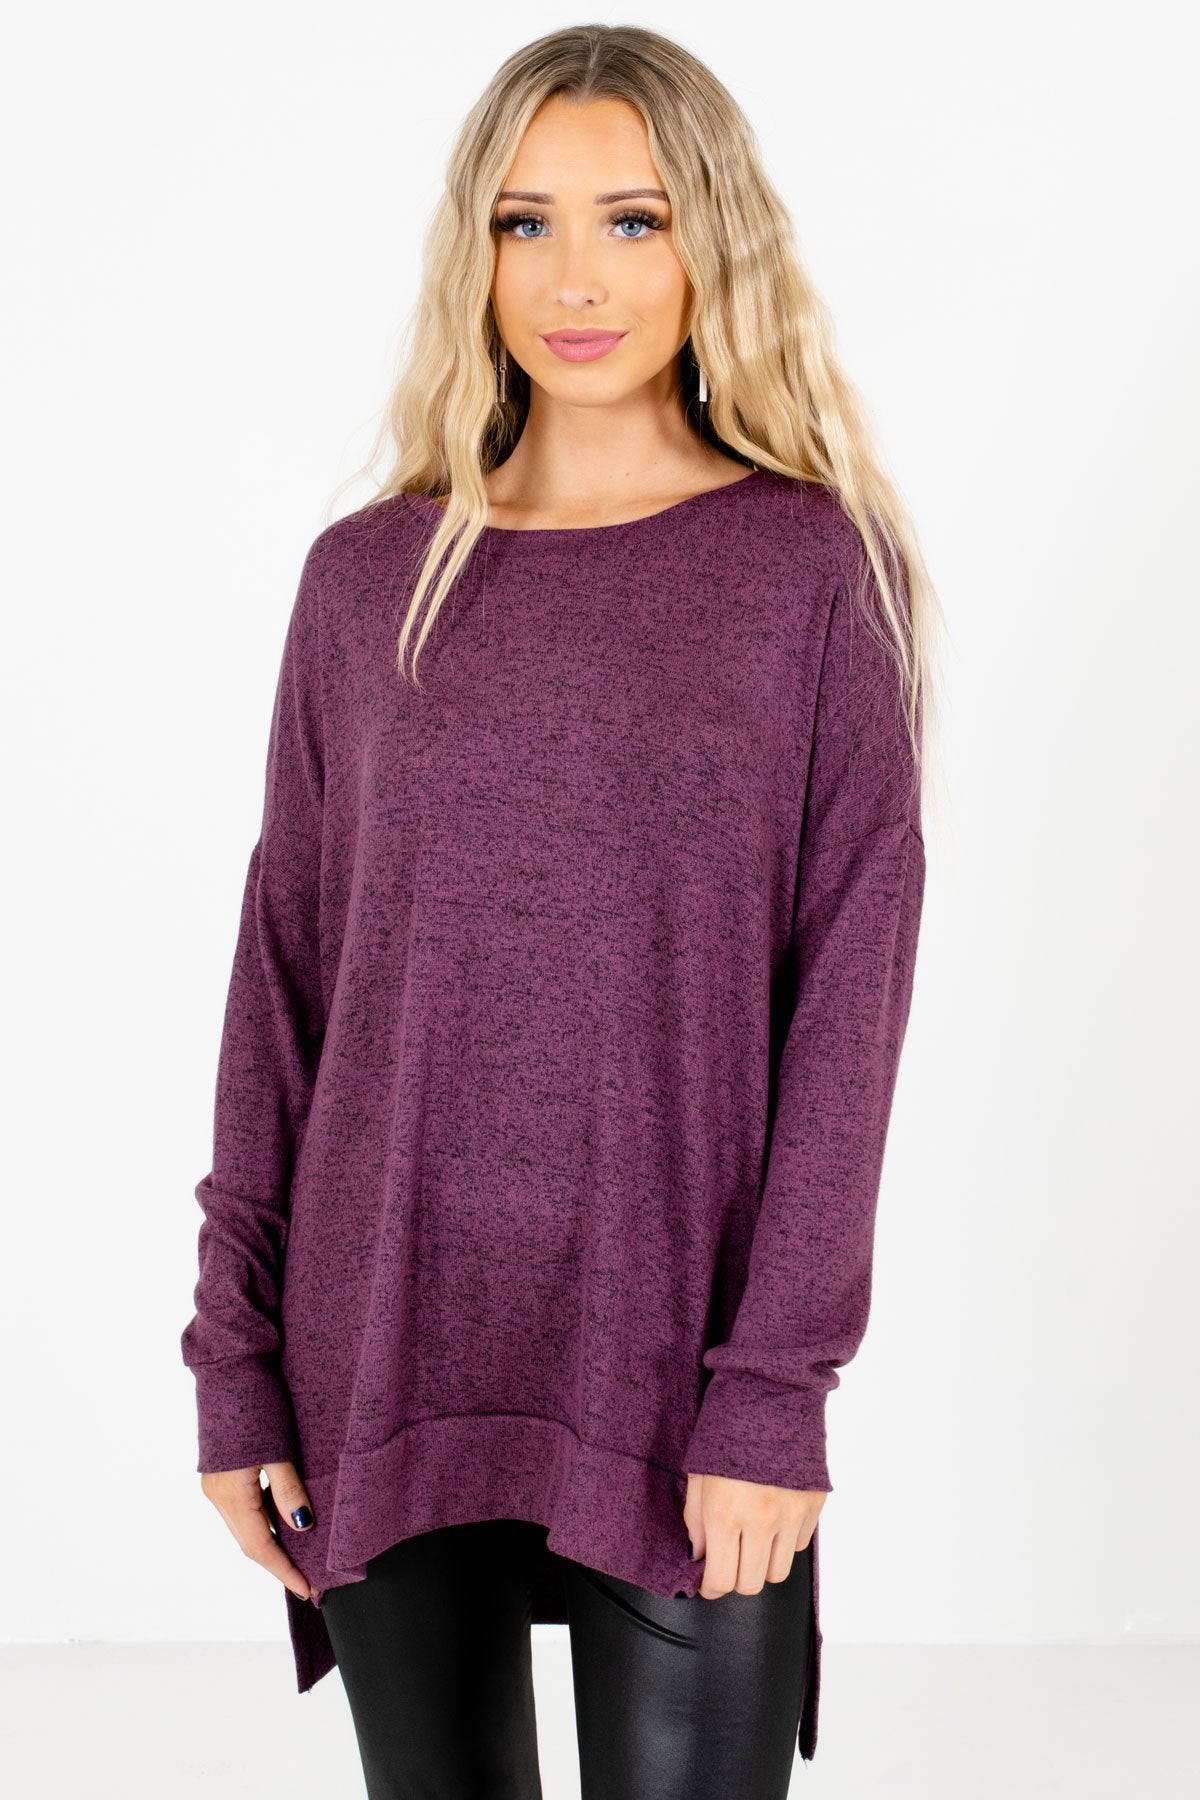 Purple High-Quality Soft Material Boutique Tops for Women